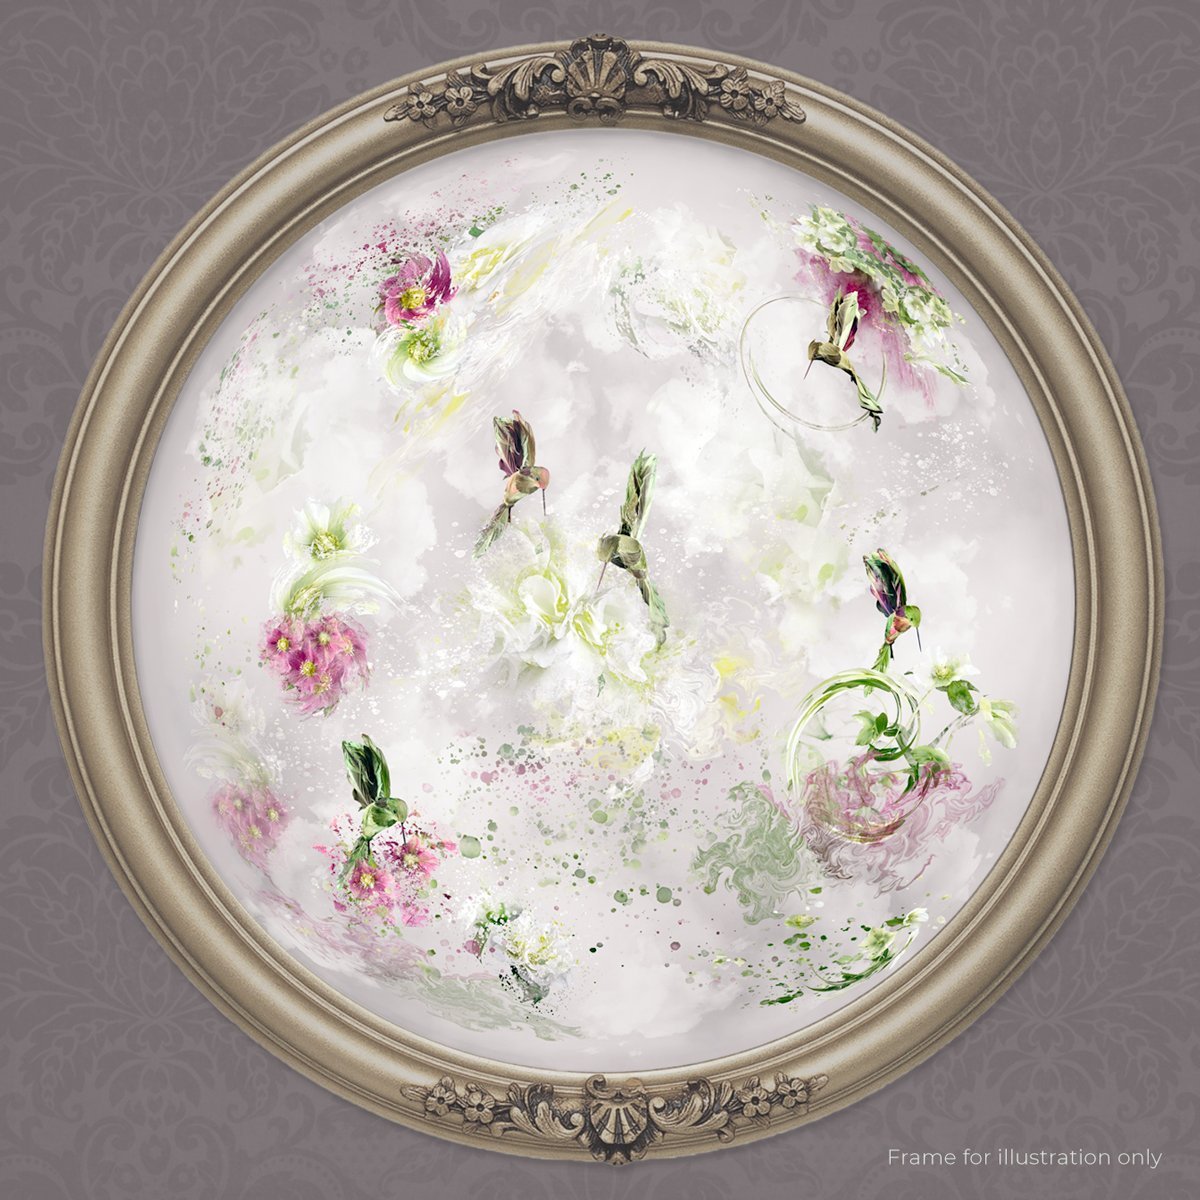 The Hummingbirds floral sphere art in gold frame